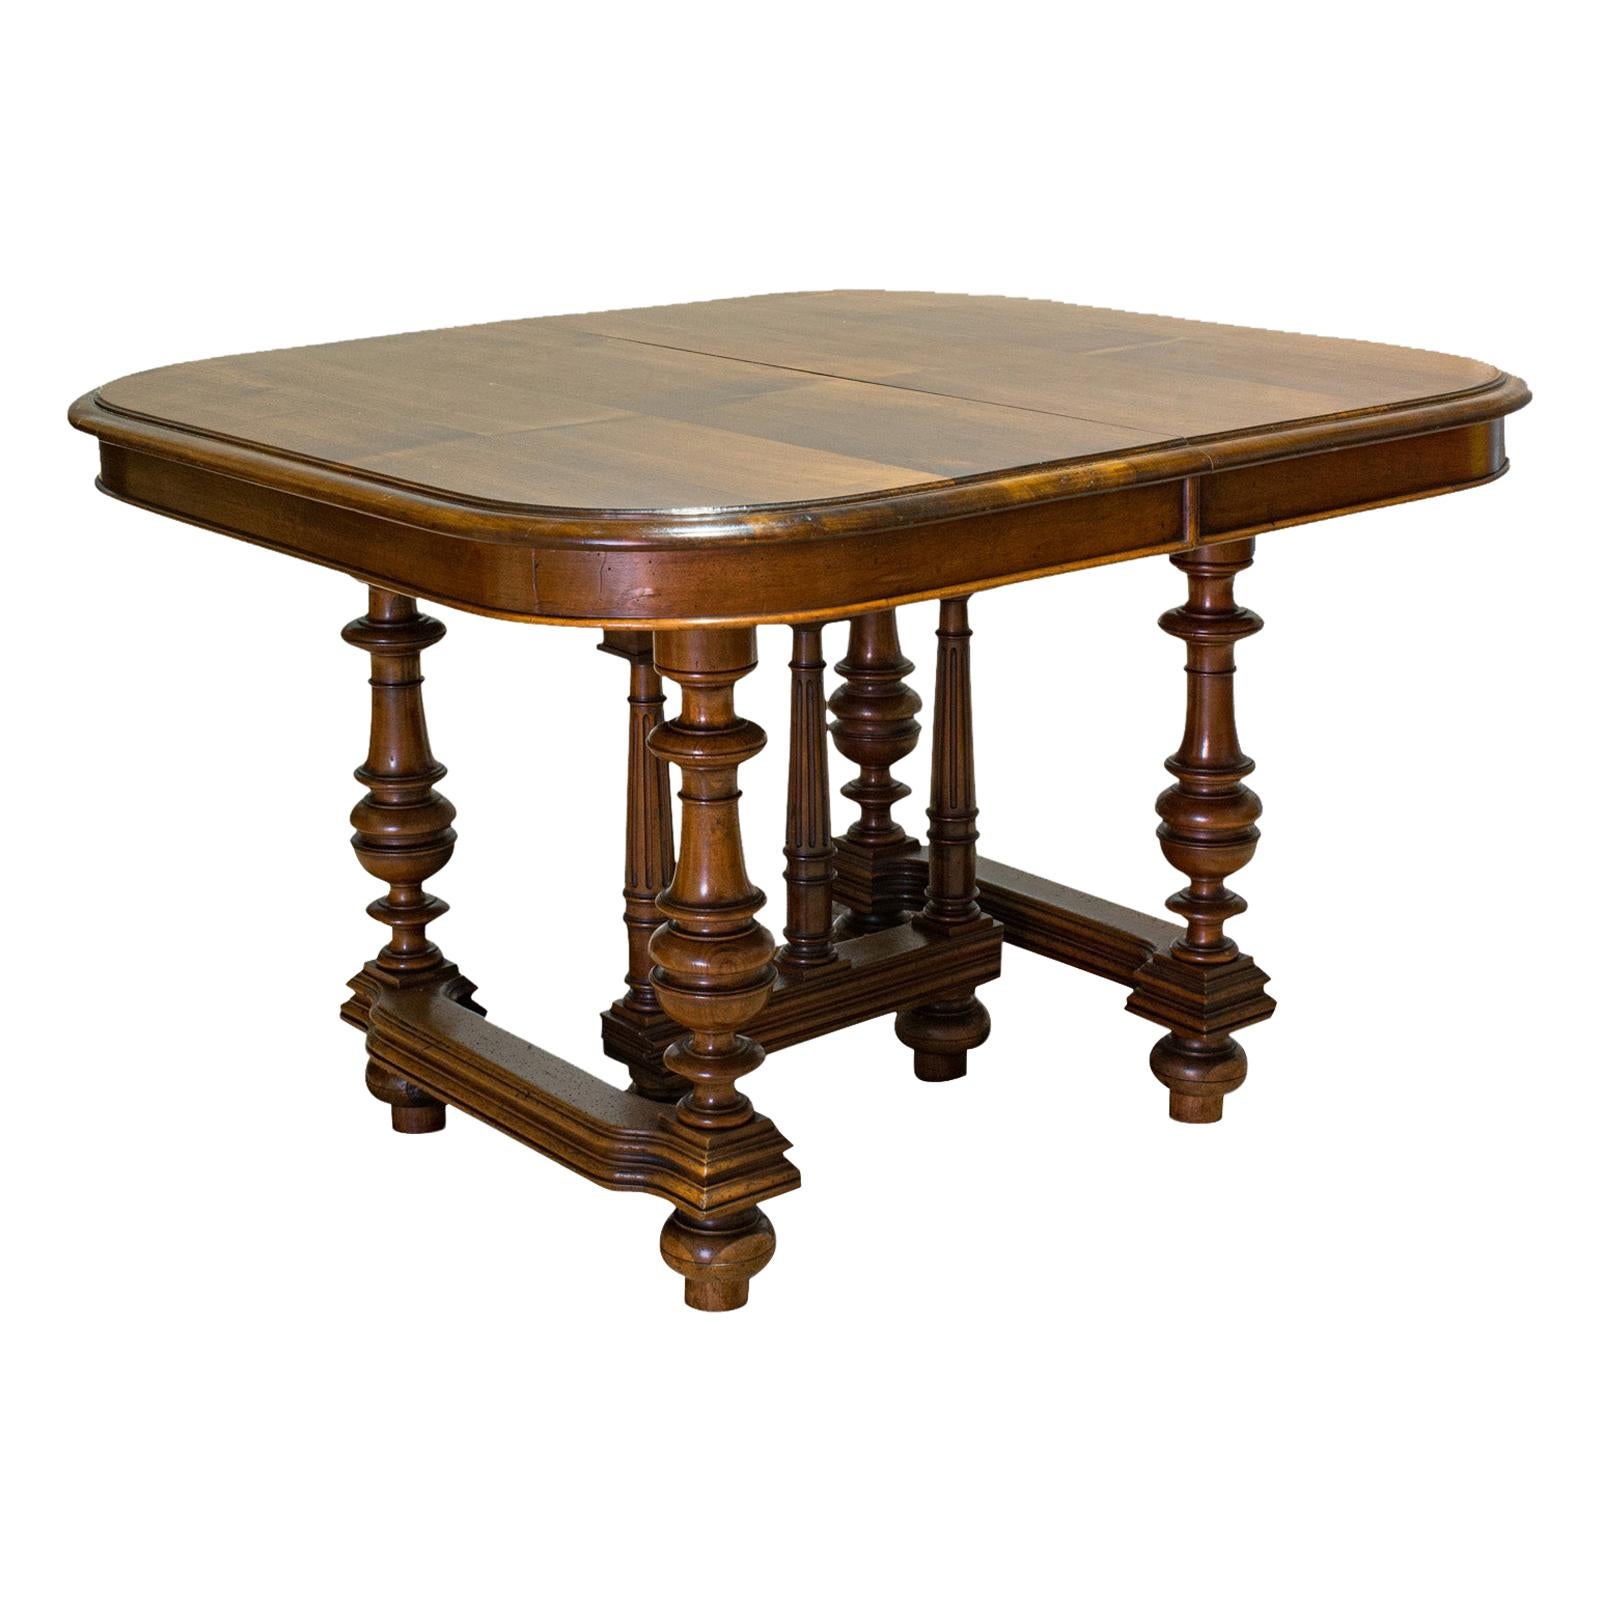 Large Antique Extending Dining Table, French, Walnut, Seats 4-10, circa 1900